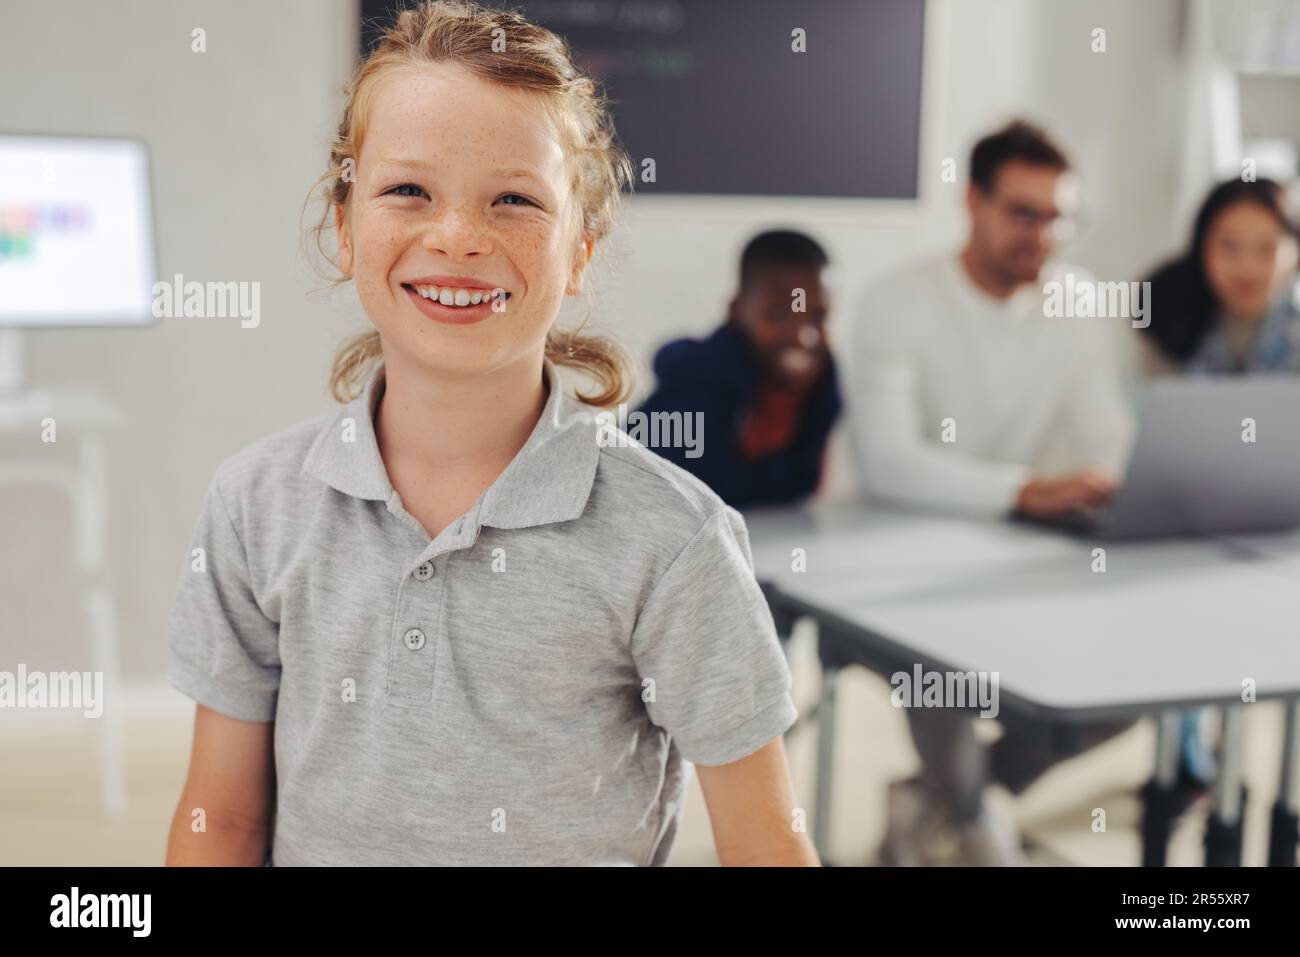 Young male student standing in a coding classroom, smiling at the camera with confidence. Young school boy showing excitement for a computer programmi Stock Photo